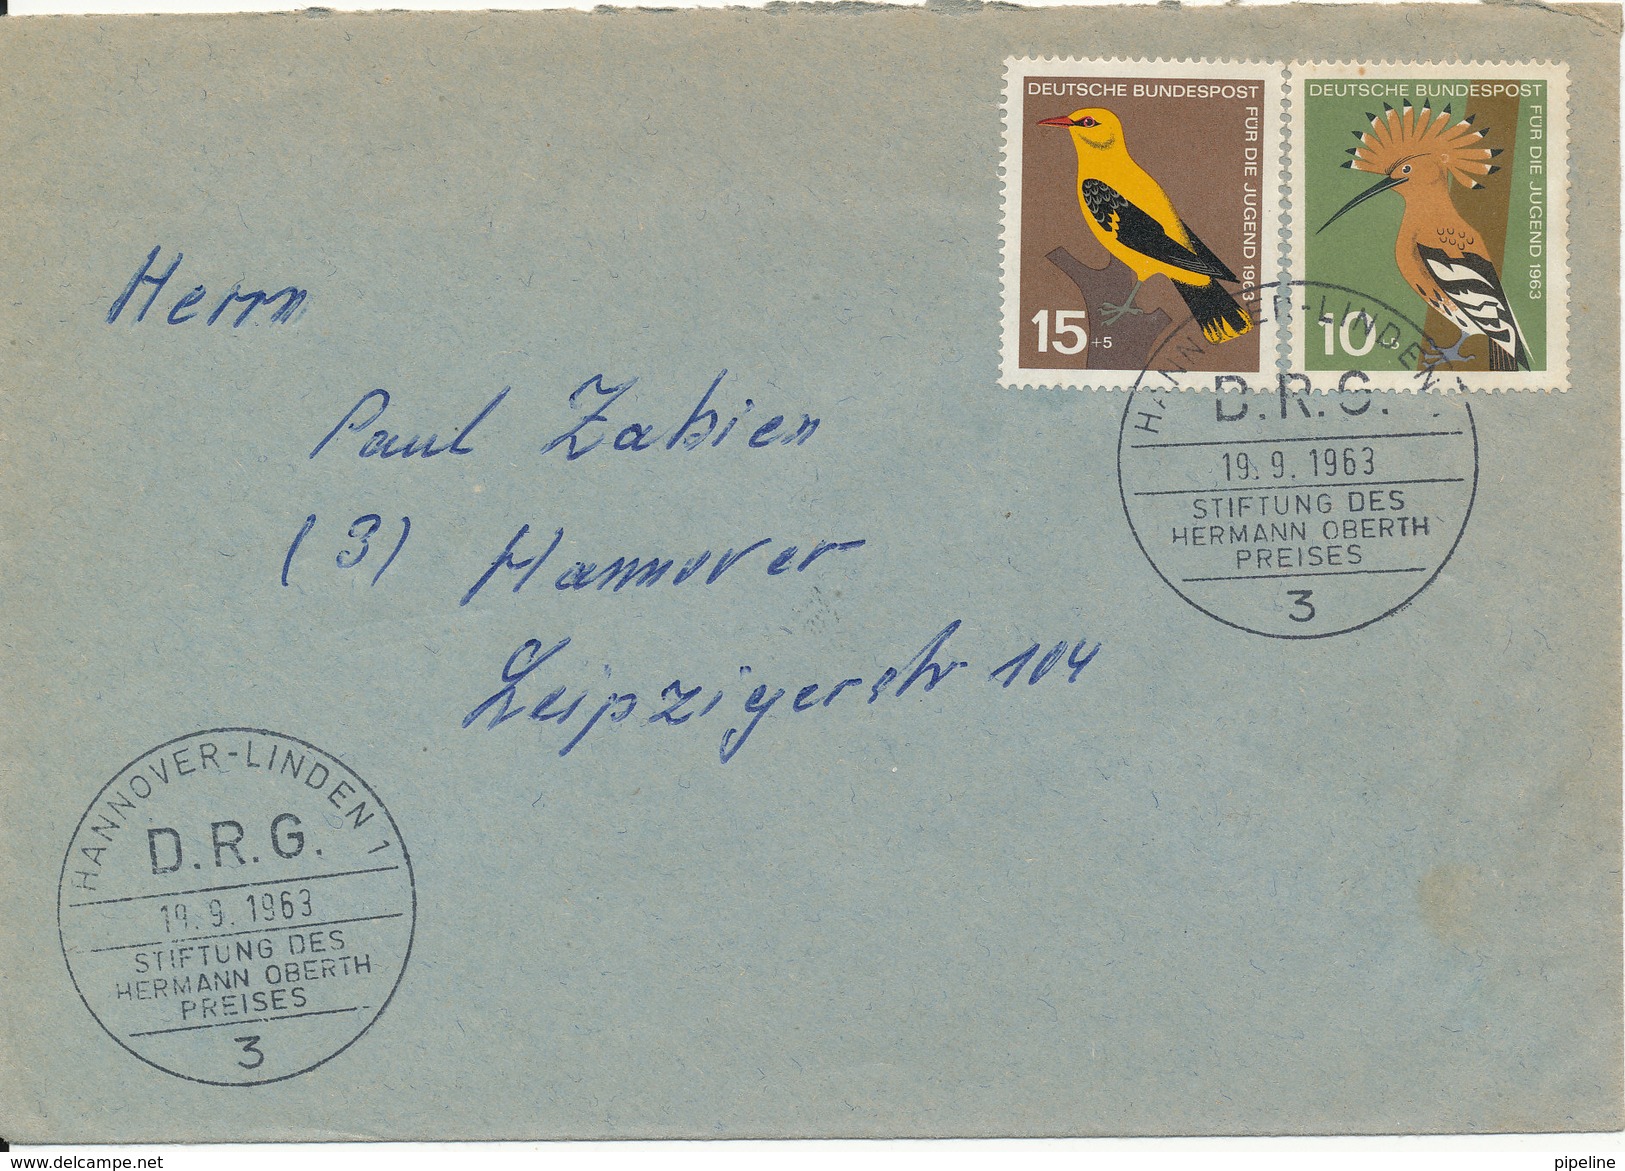 Germany Cover With Special Postmark And BIRD Stamps 19-9-1963 - Covers & Documents